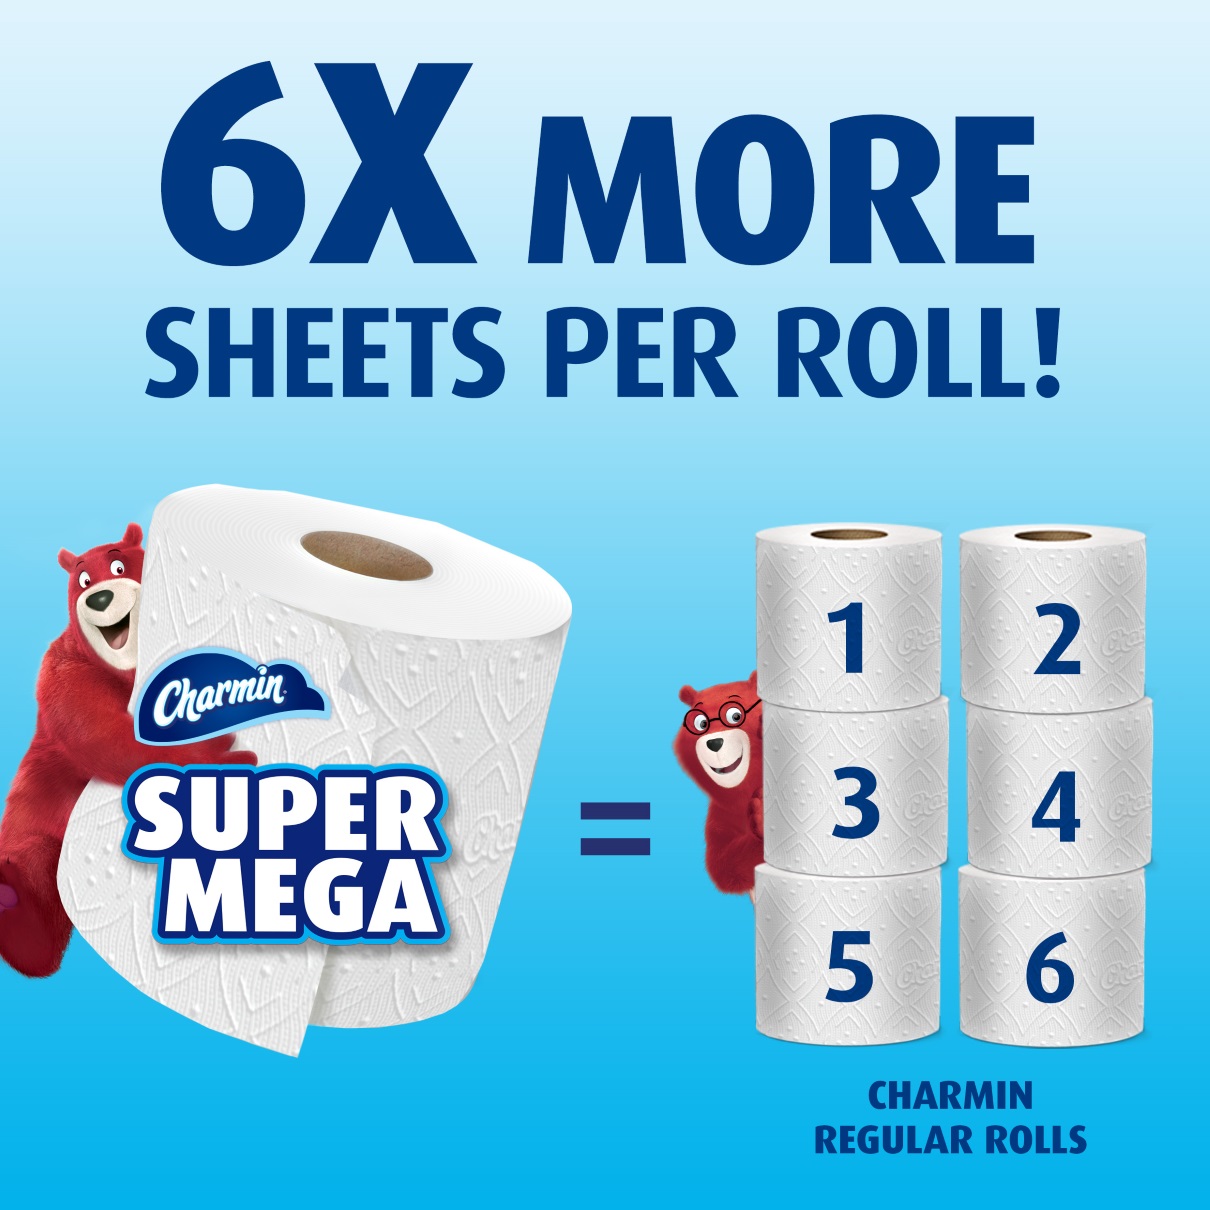 Get 6X more sheets per roll with ultra strong super mega roll